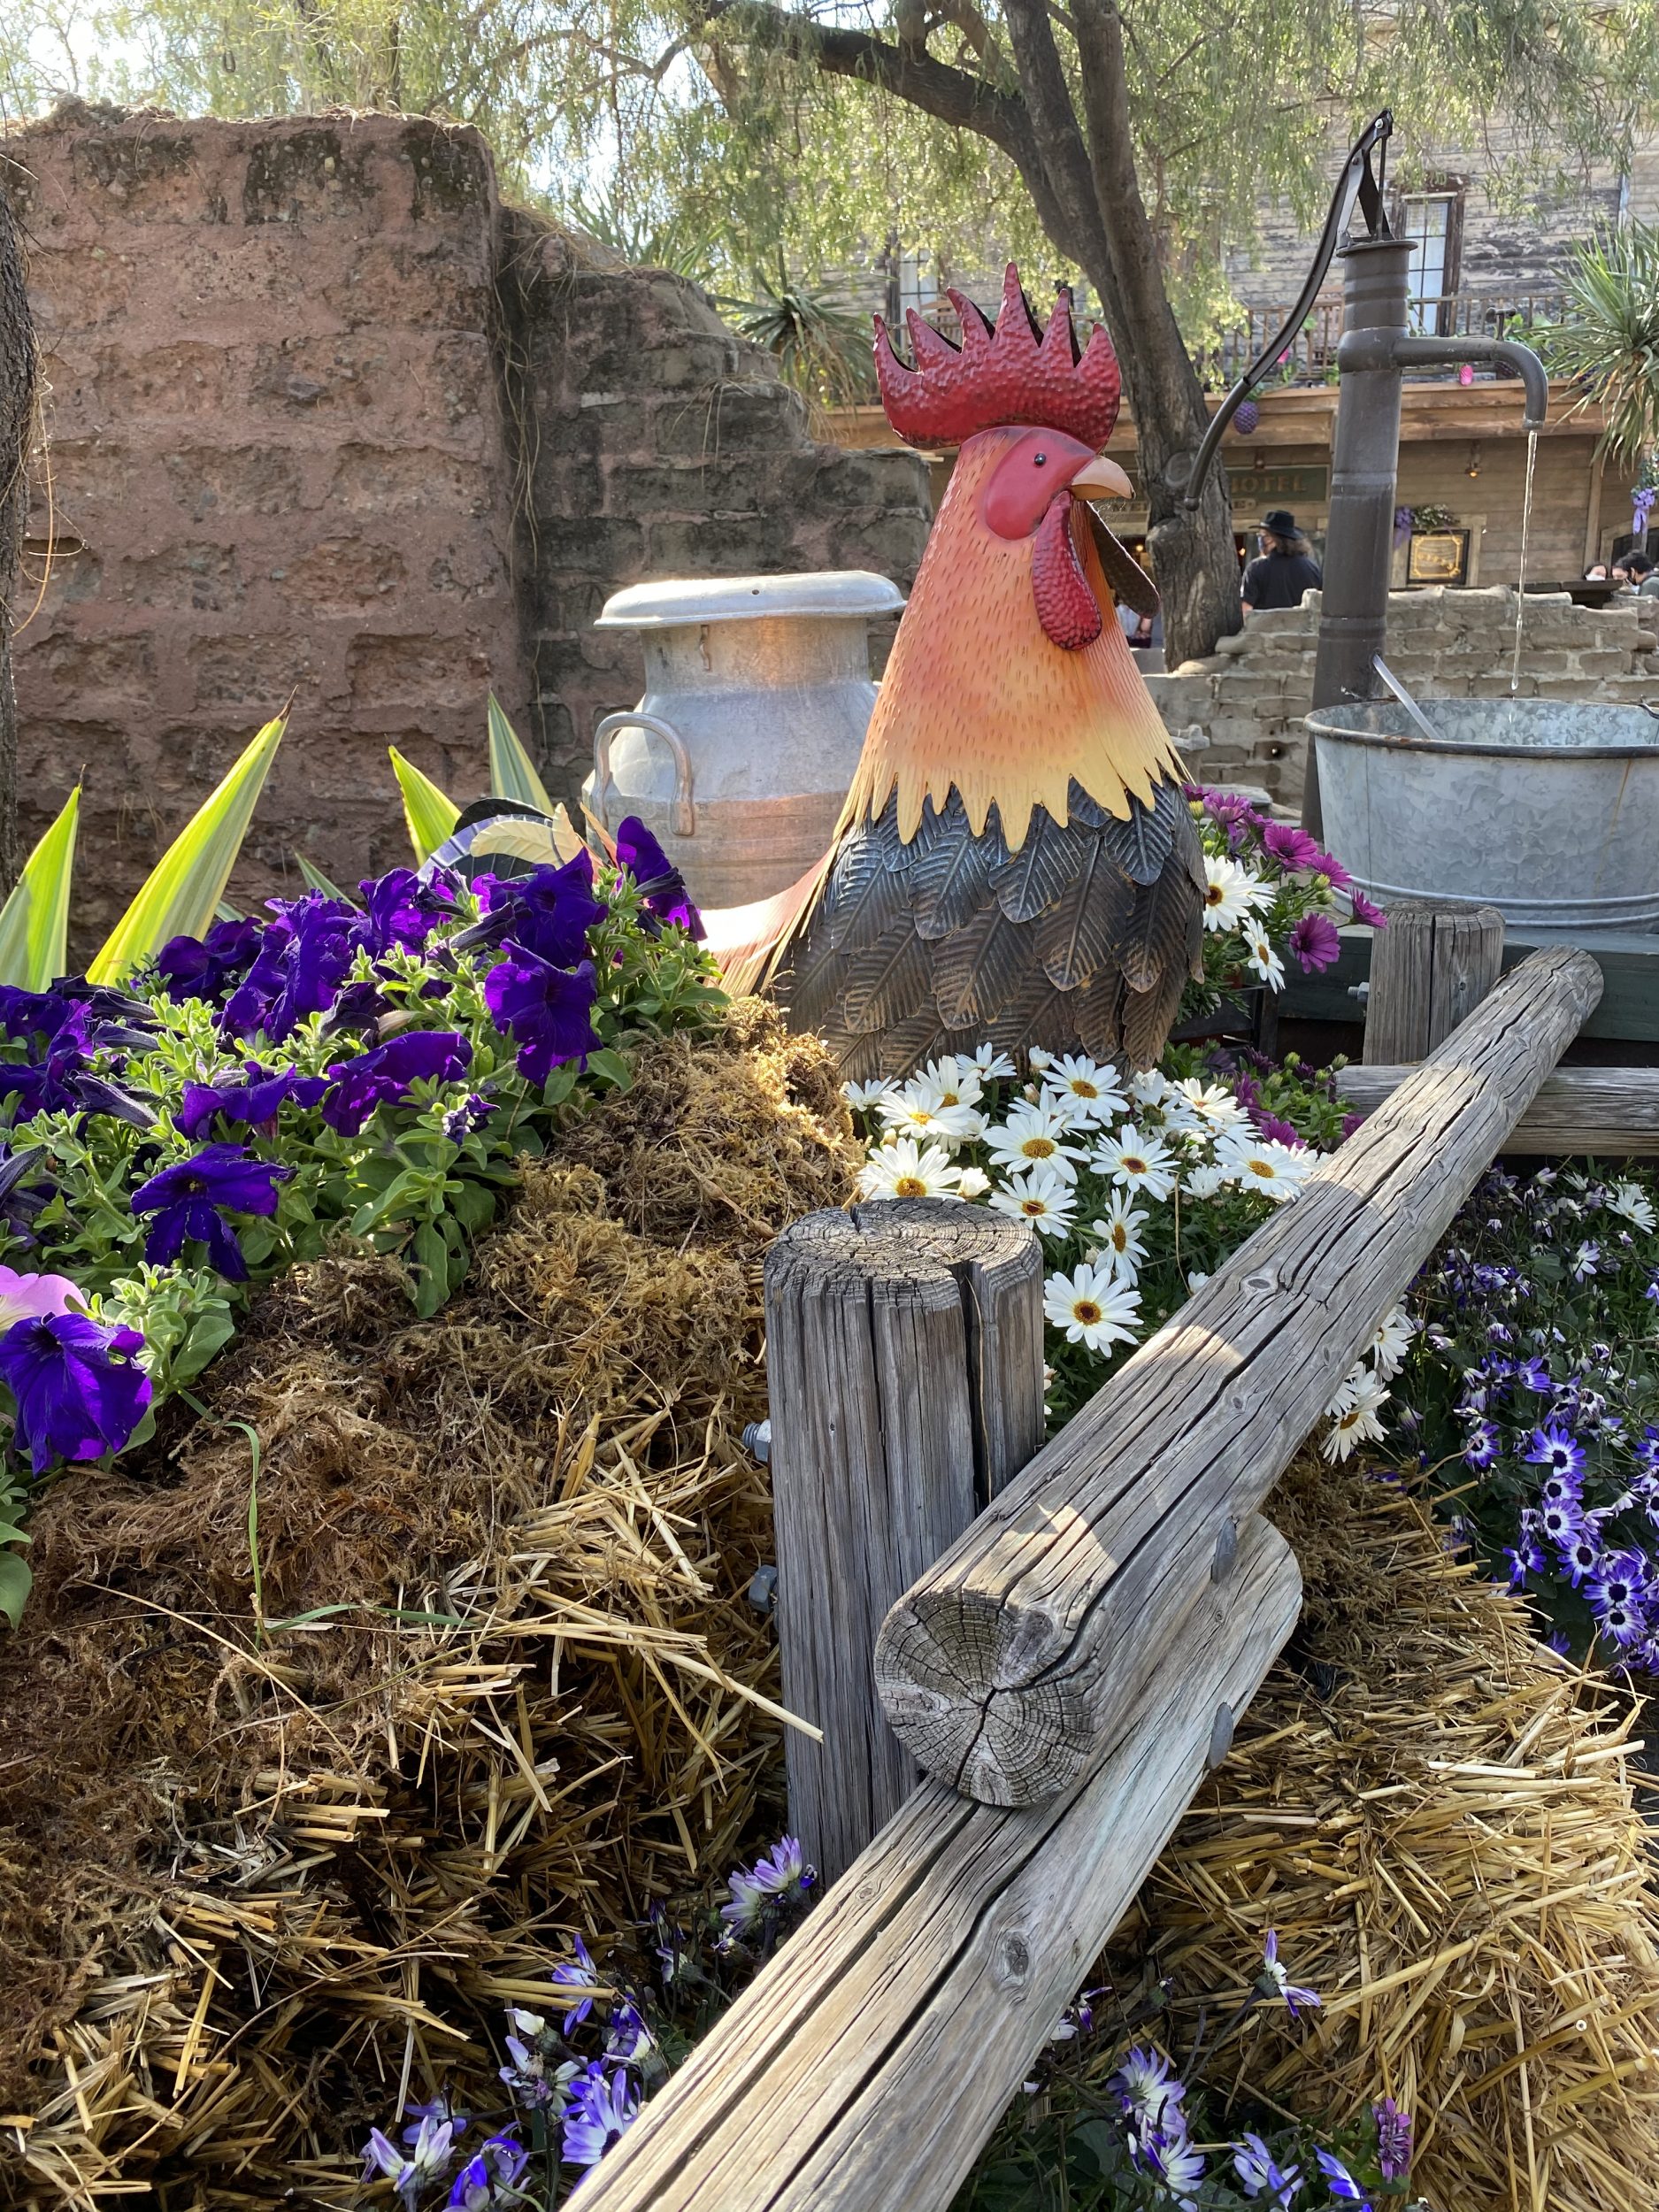 large rooster character is colorful amongst the flowers at Knott's Berry Farm